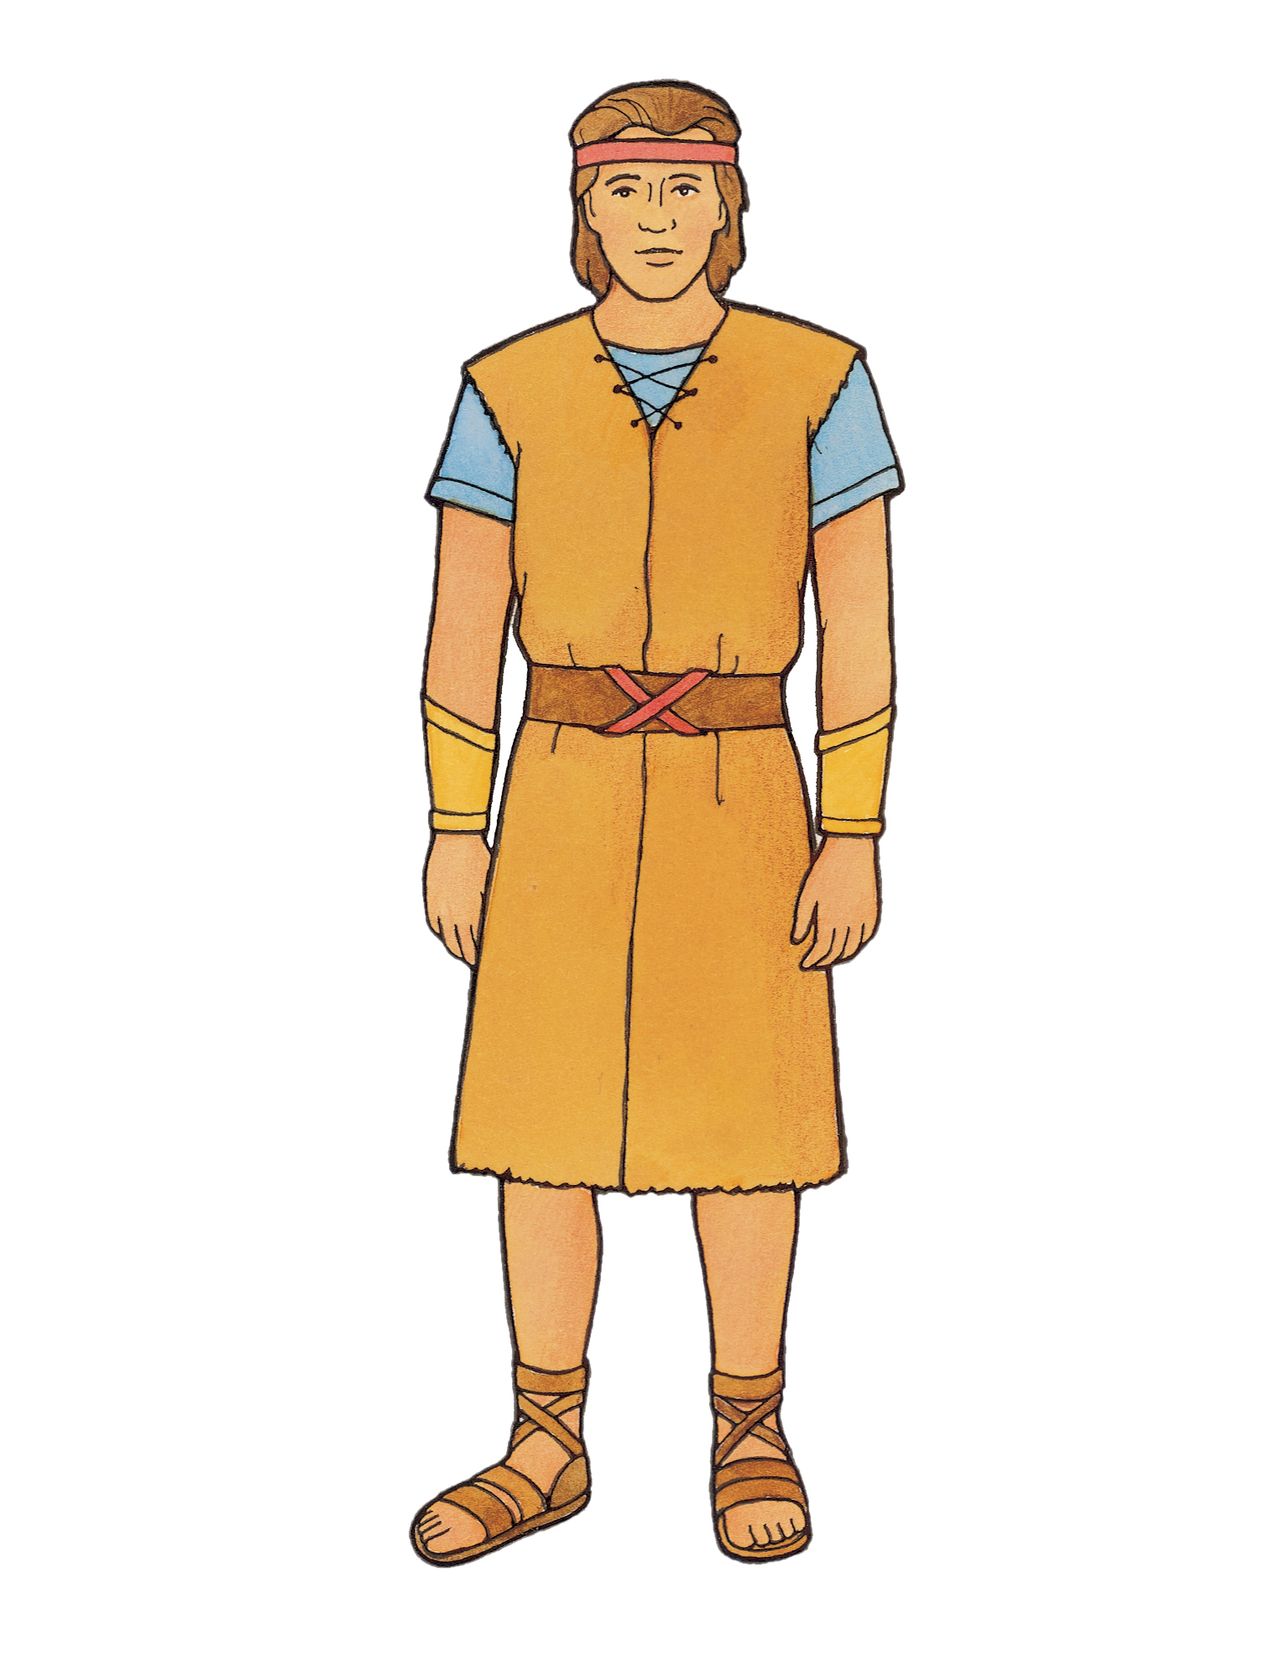 Nephi from the Book of Mormon, dressed in traditional clothing.